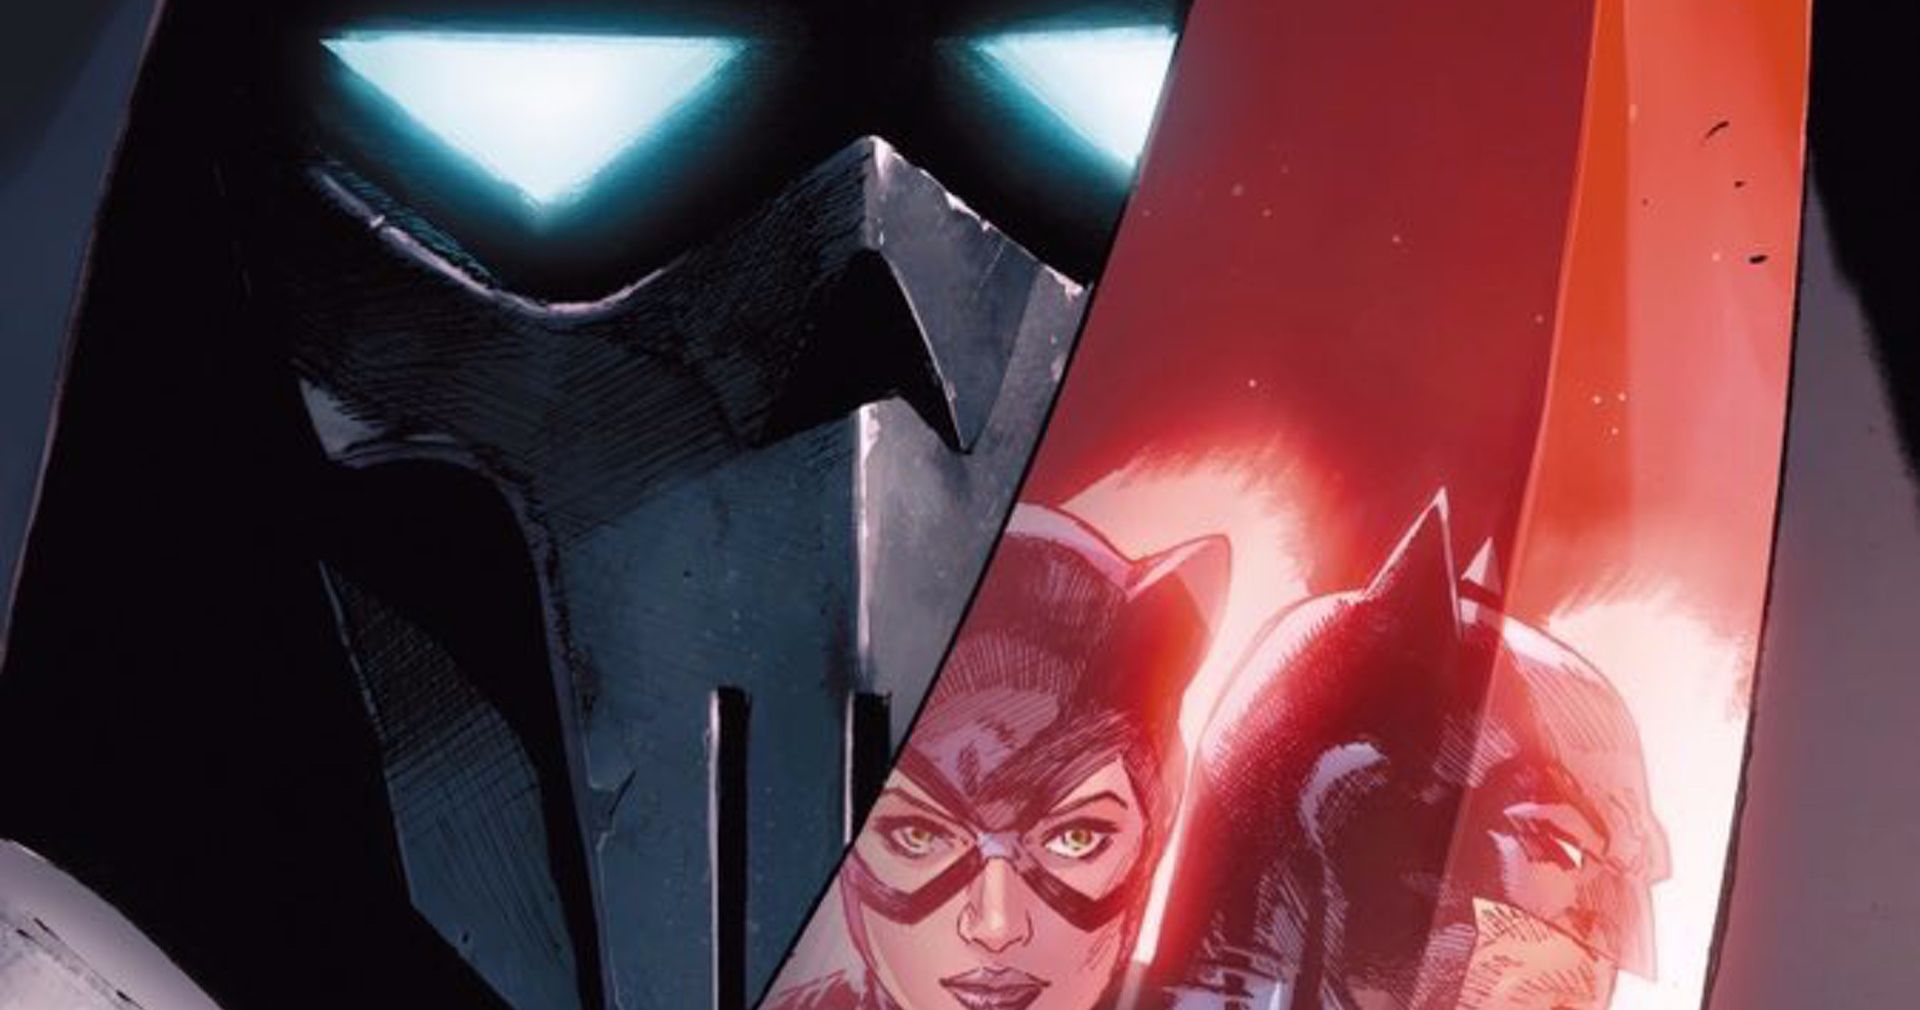 Batman: Mask of the Phantasm Villain Heads to the Pages of DC Comics